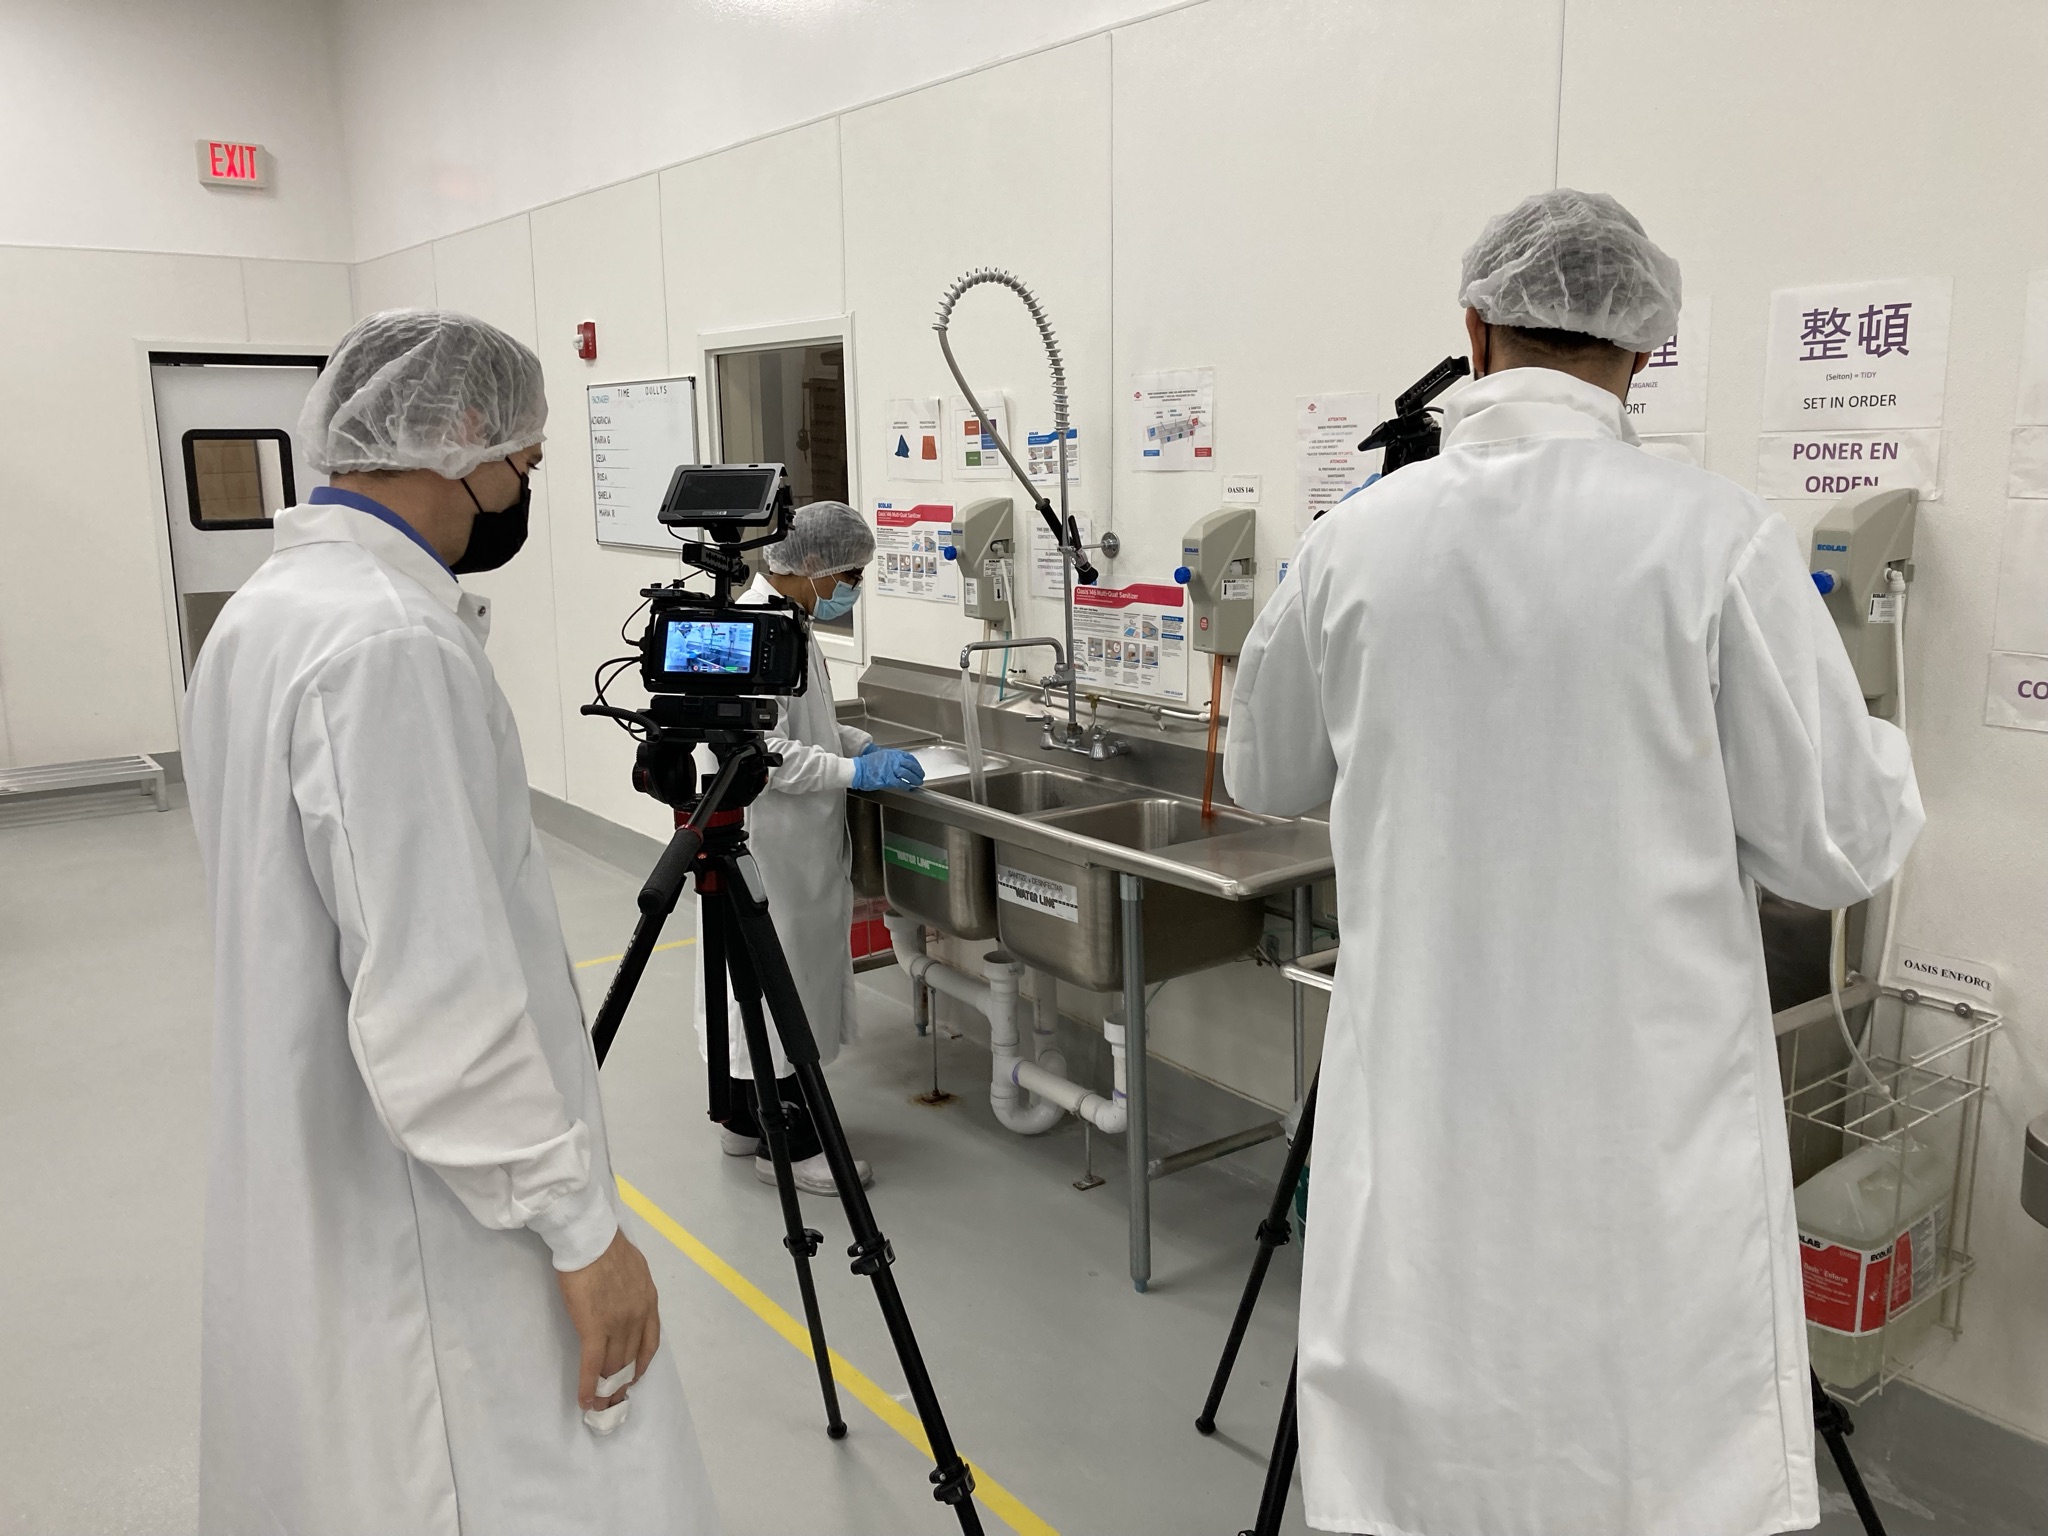 How Much Does A Manufacturing Video Cost?